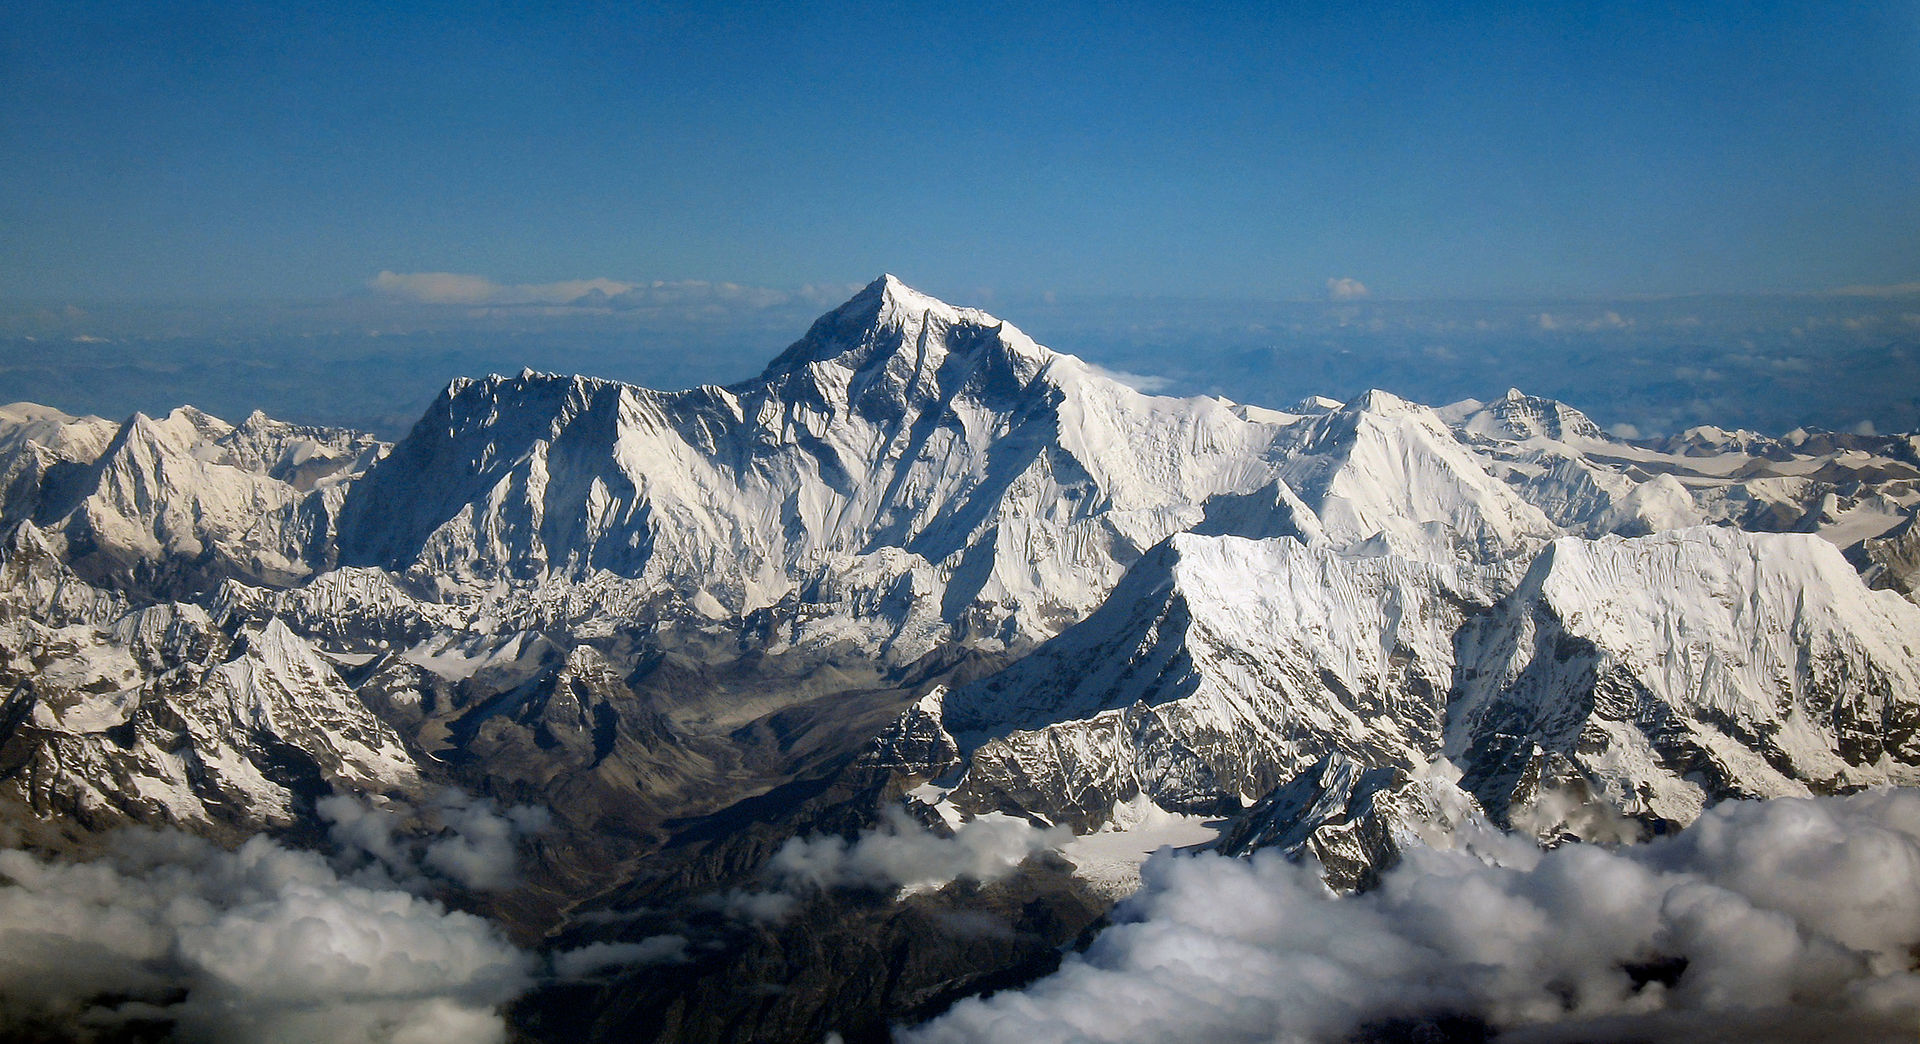 34 tonnes of waste collected from 4 peaks including Mount Everest in Nepal